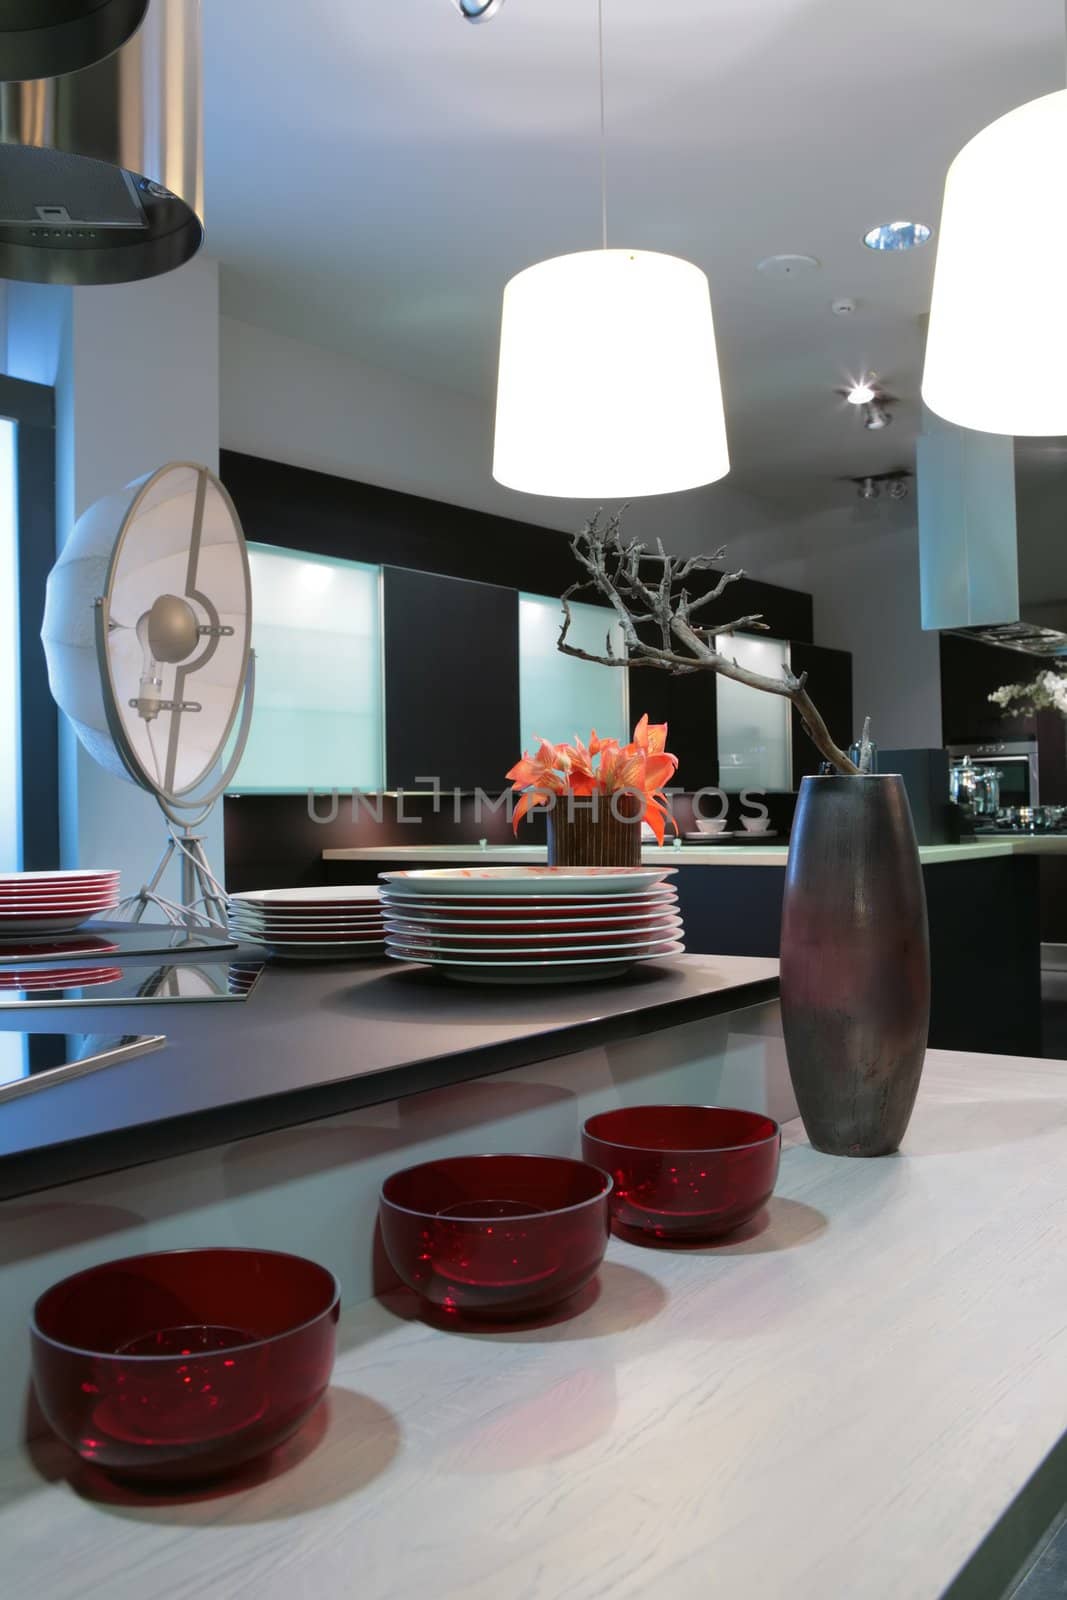 interior of the modern kitchen with red flowers